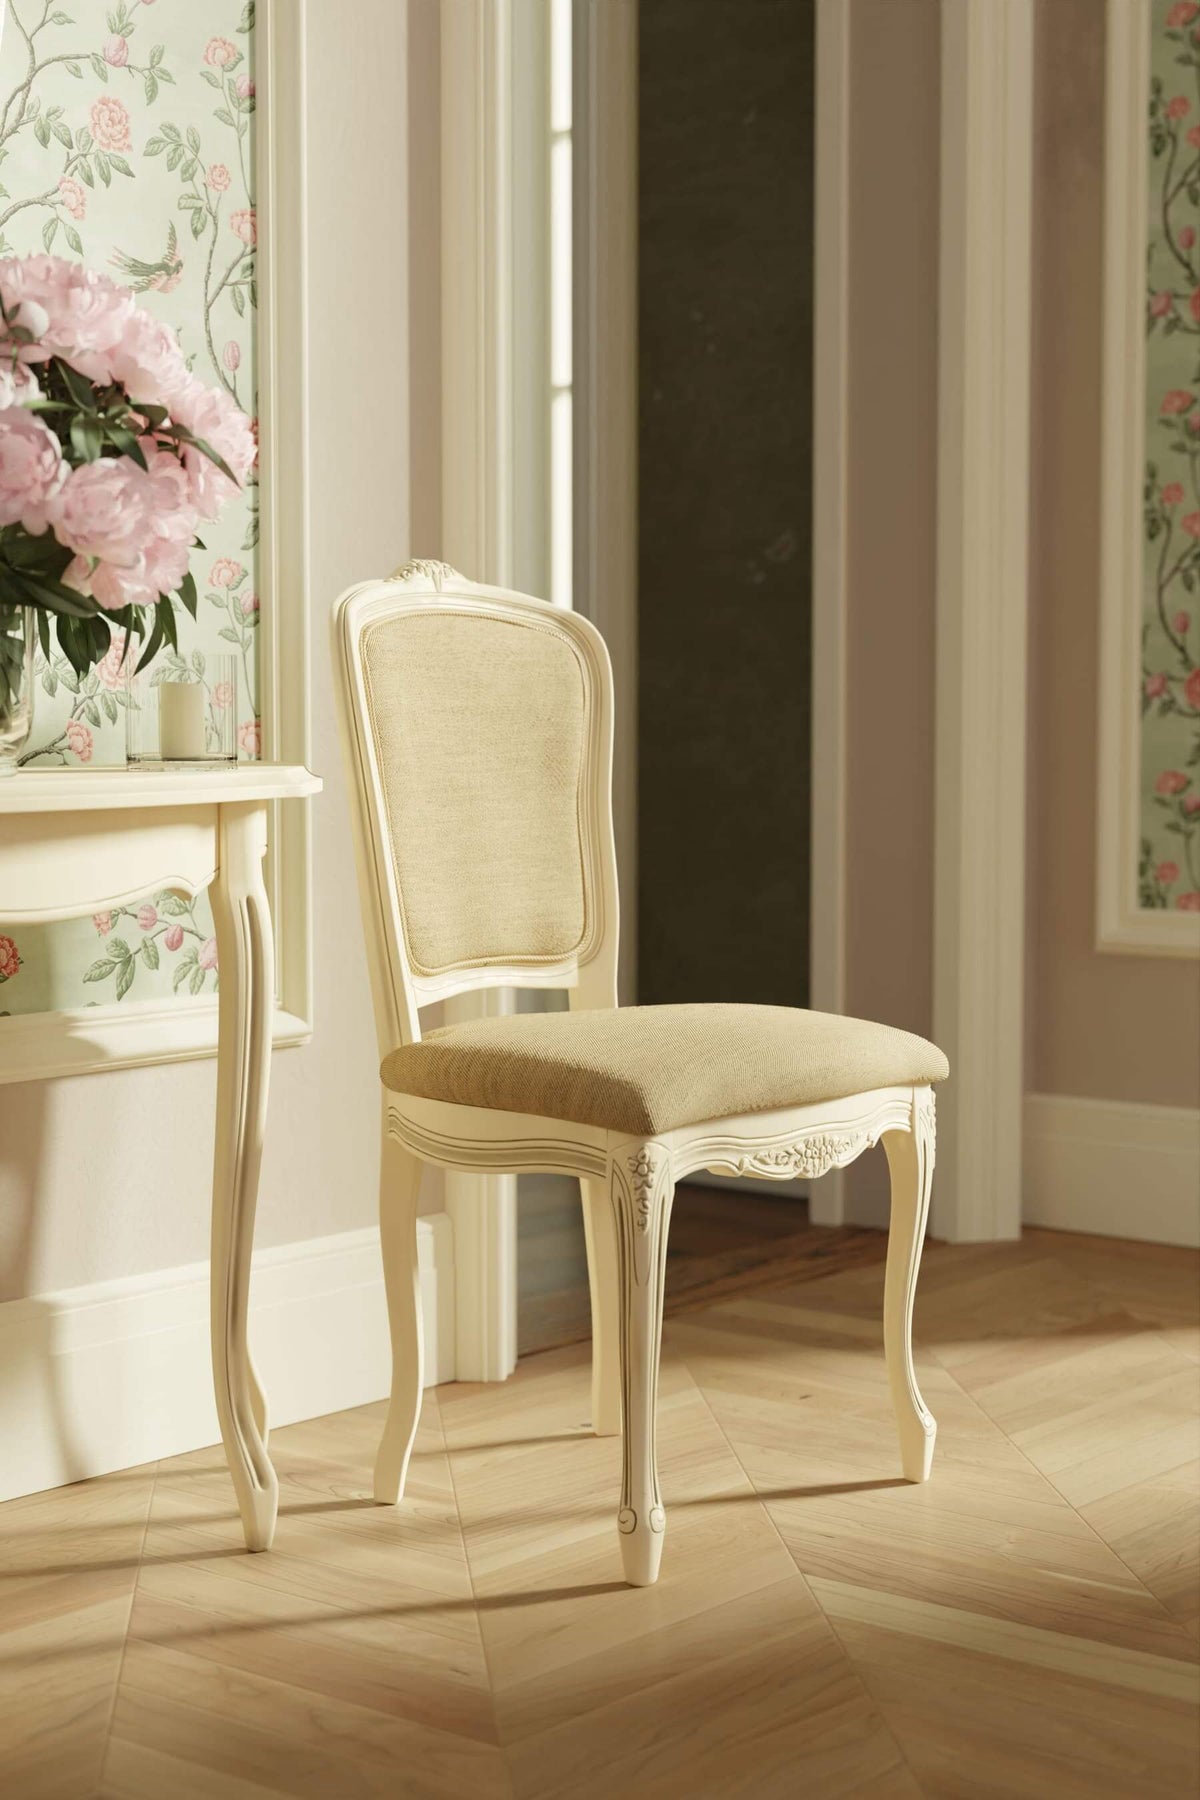 Provencale Pair of Dining Chairs